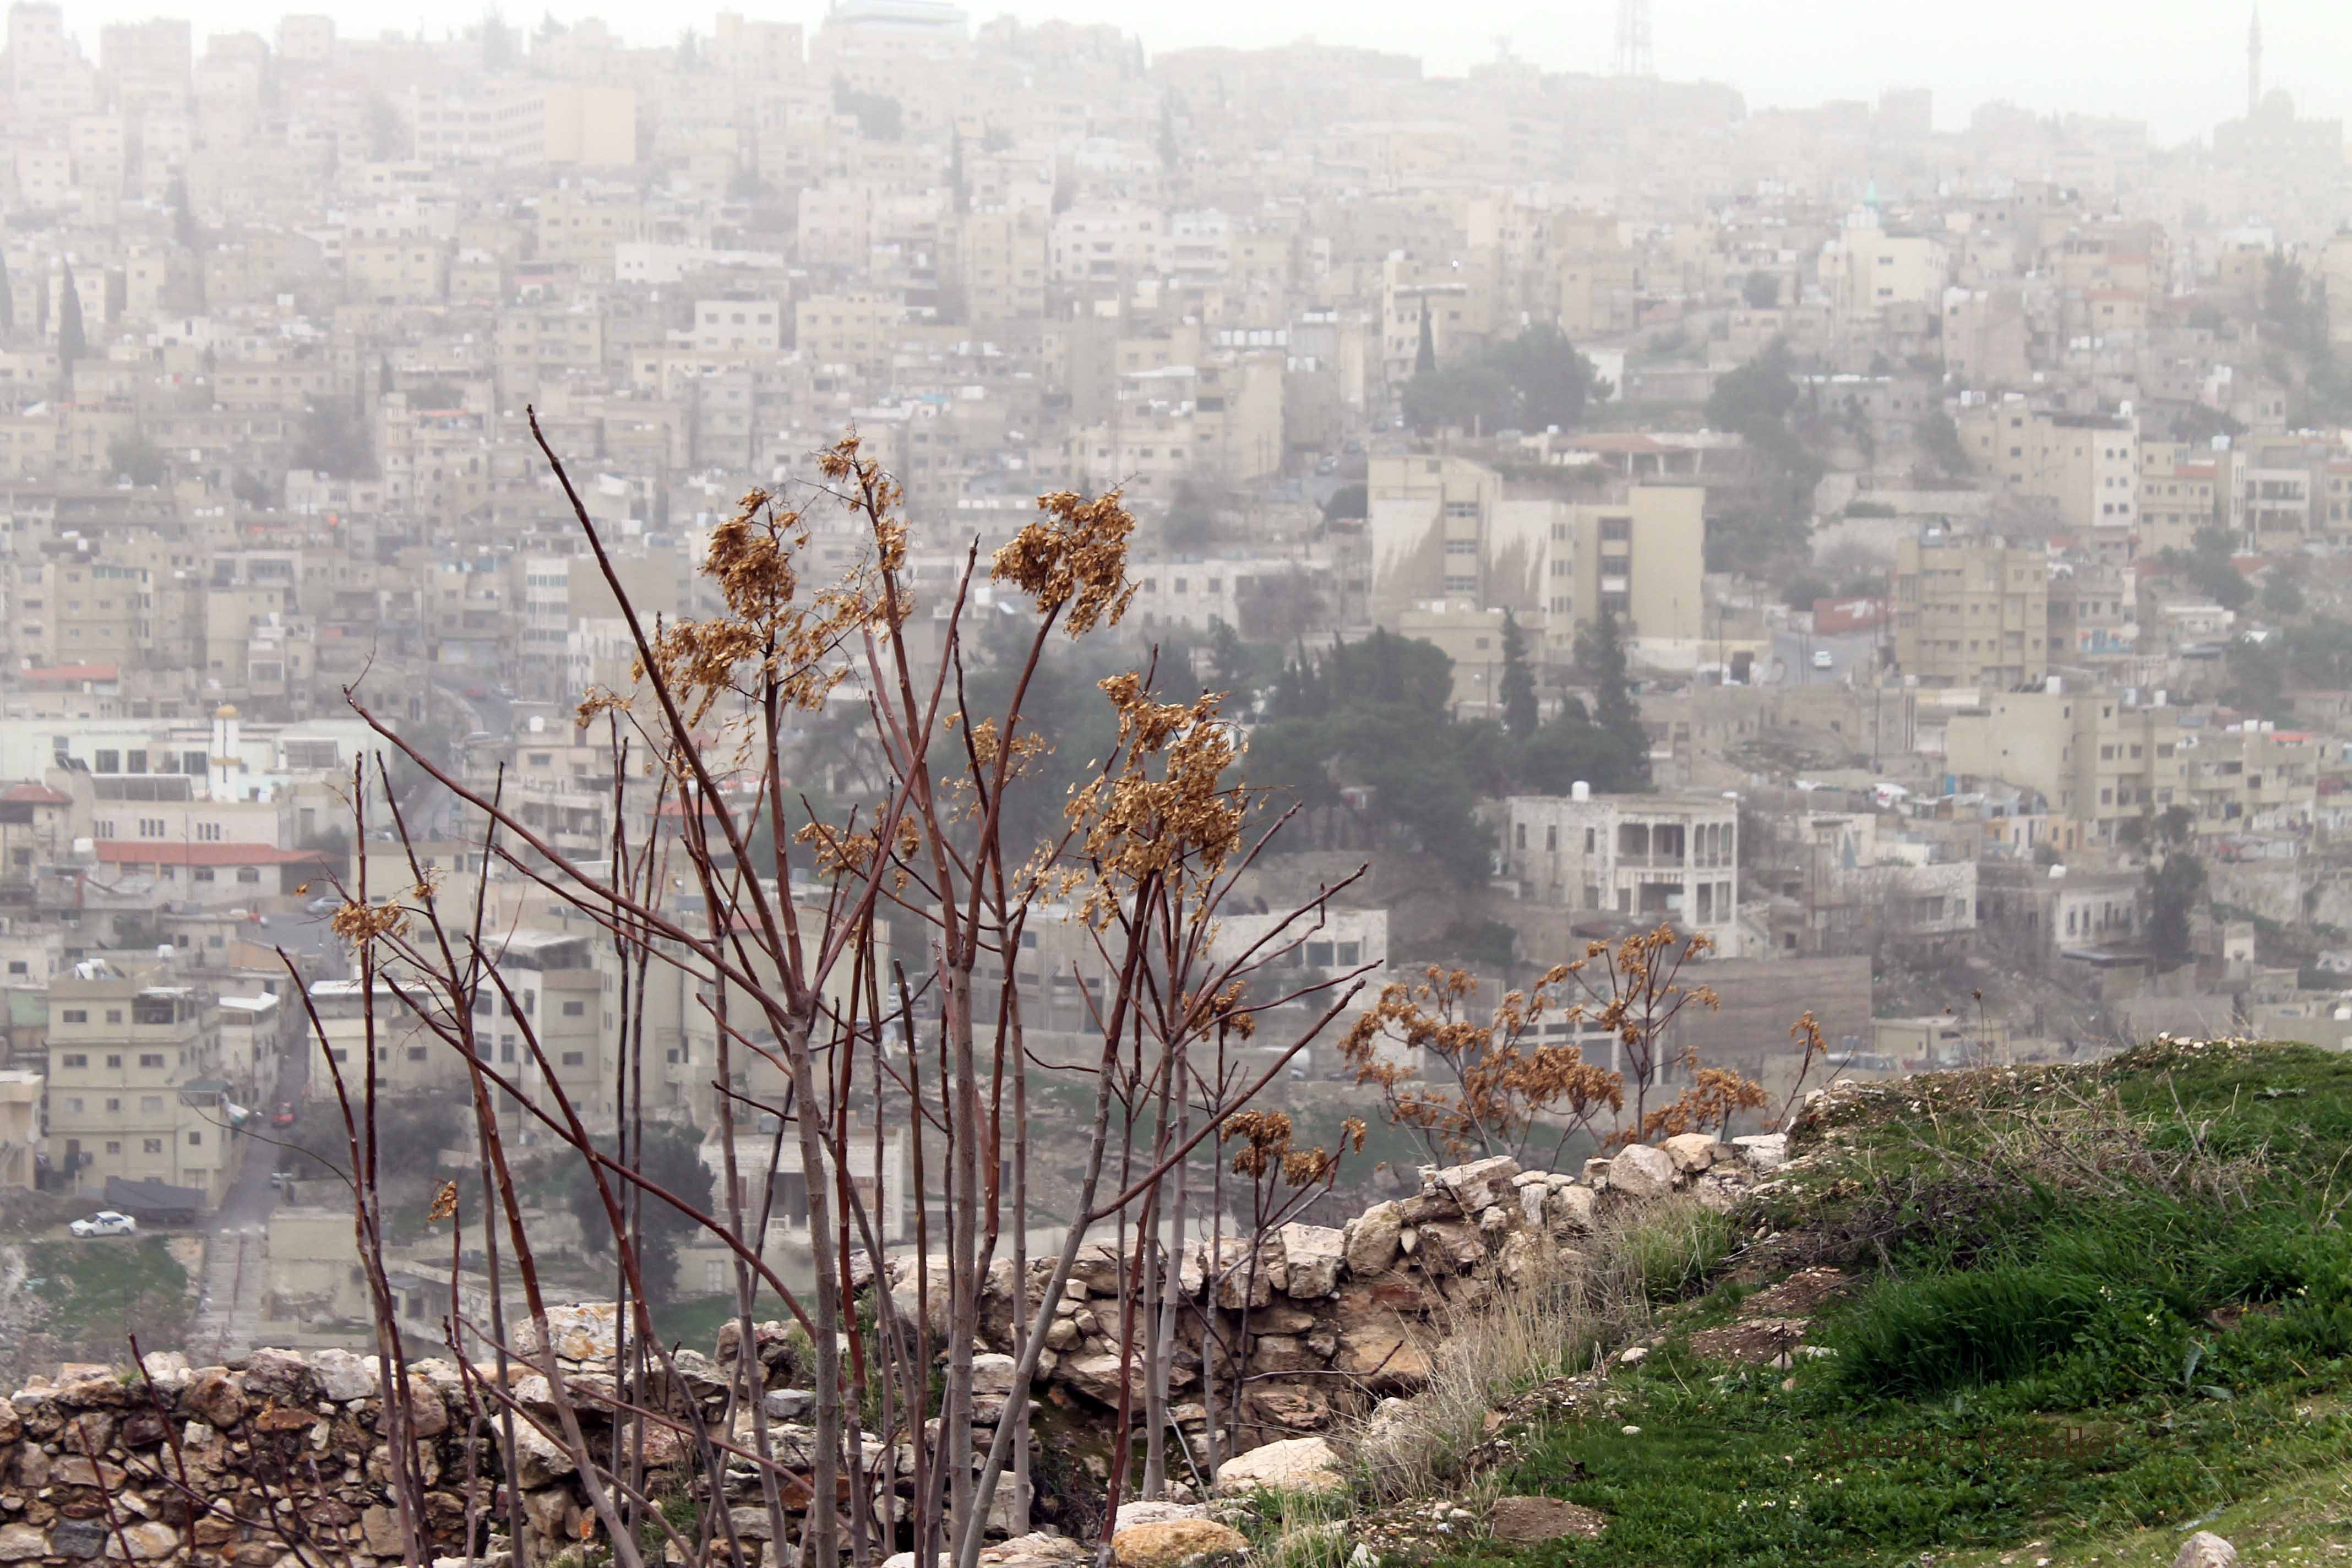 View of city of Amman from Citadel, weeds in foreground, concrete building mass beyond shrouded in fog